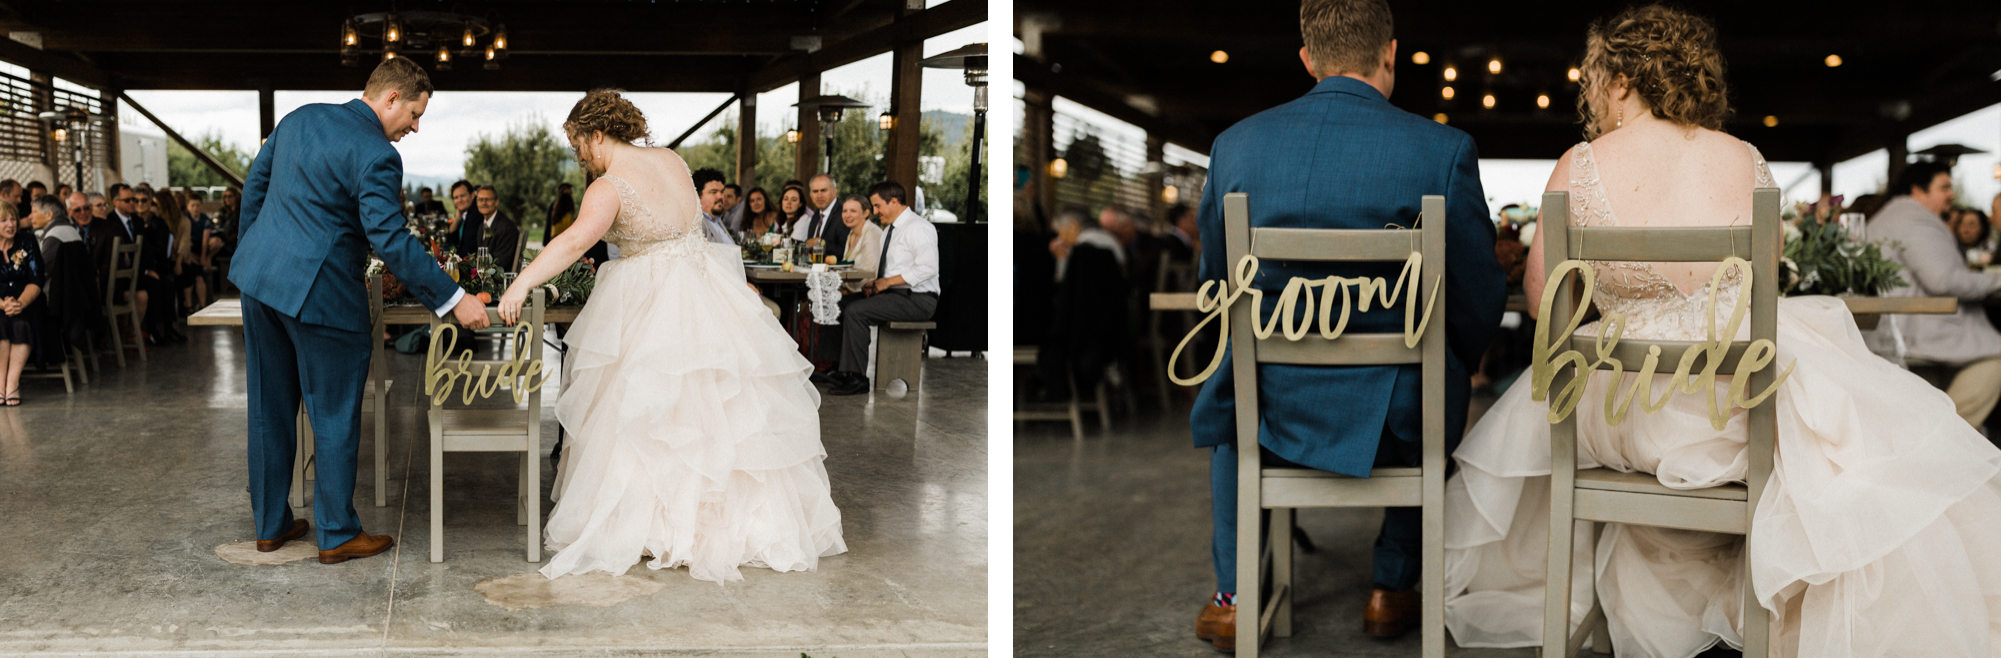 Bride and groom sit at head table with "bride" and "groom" signs adorning their chairs.